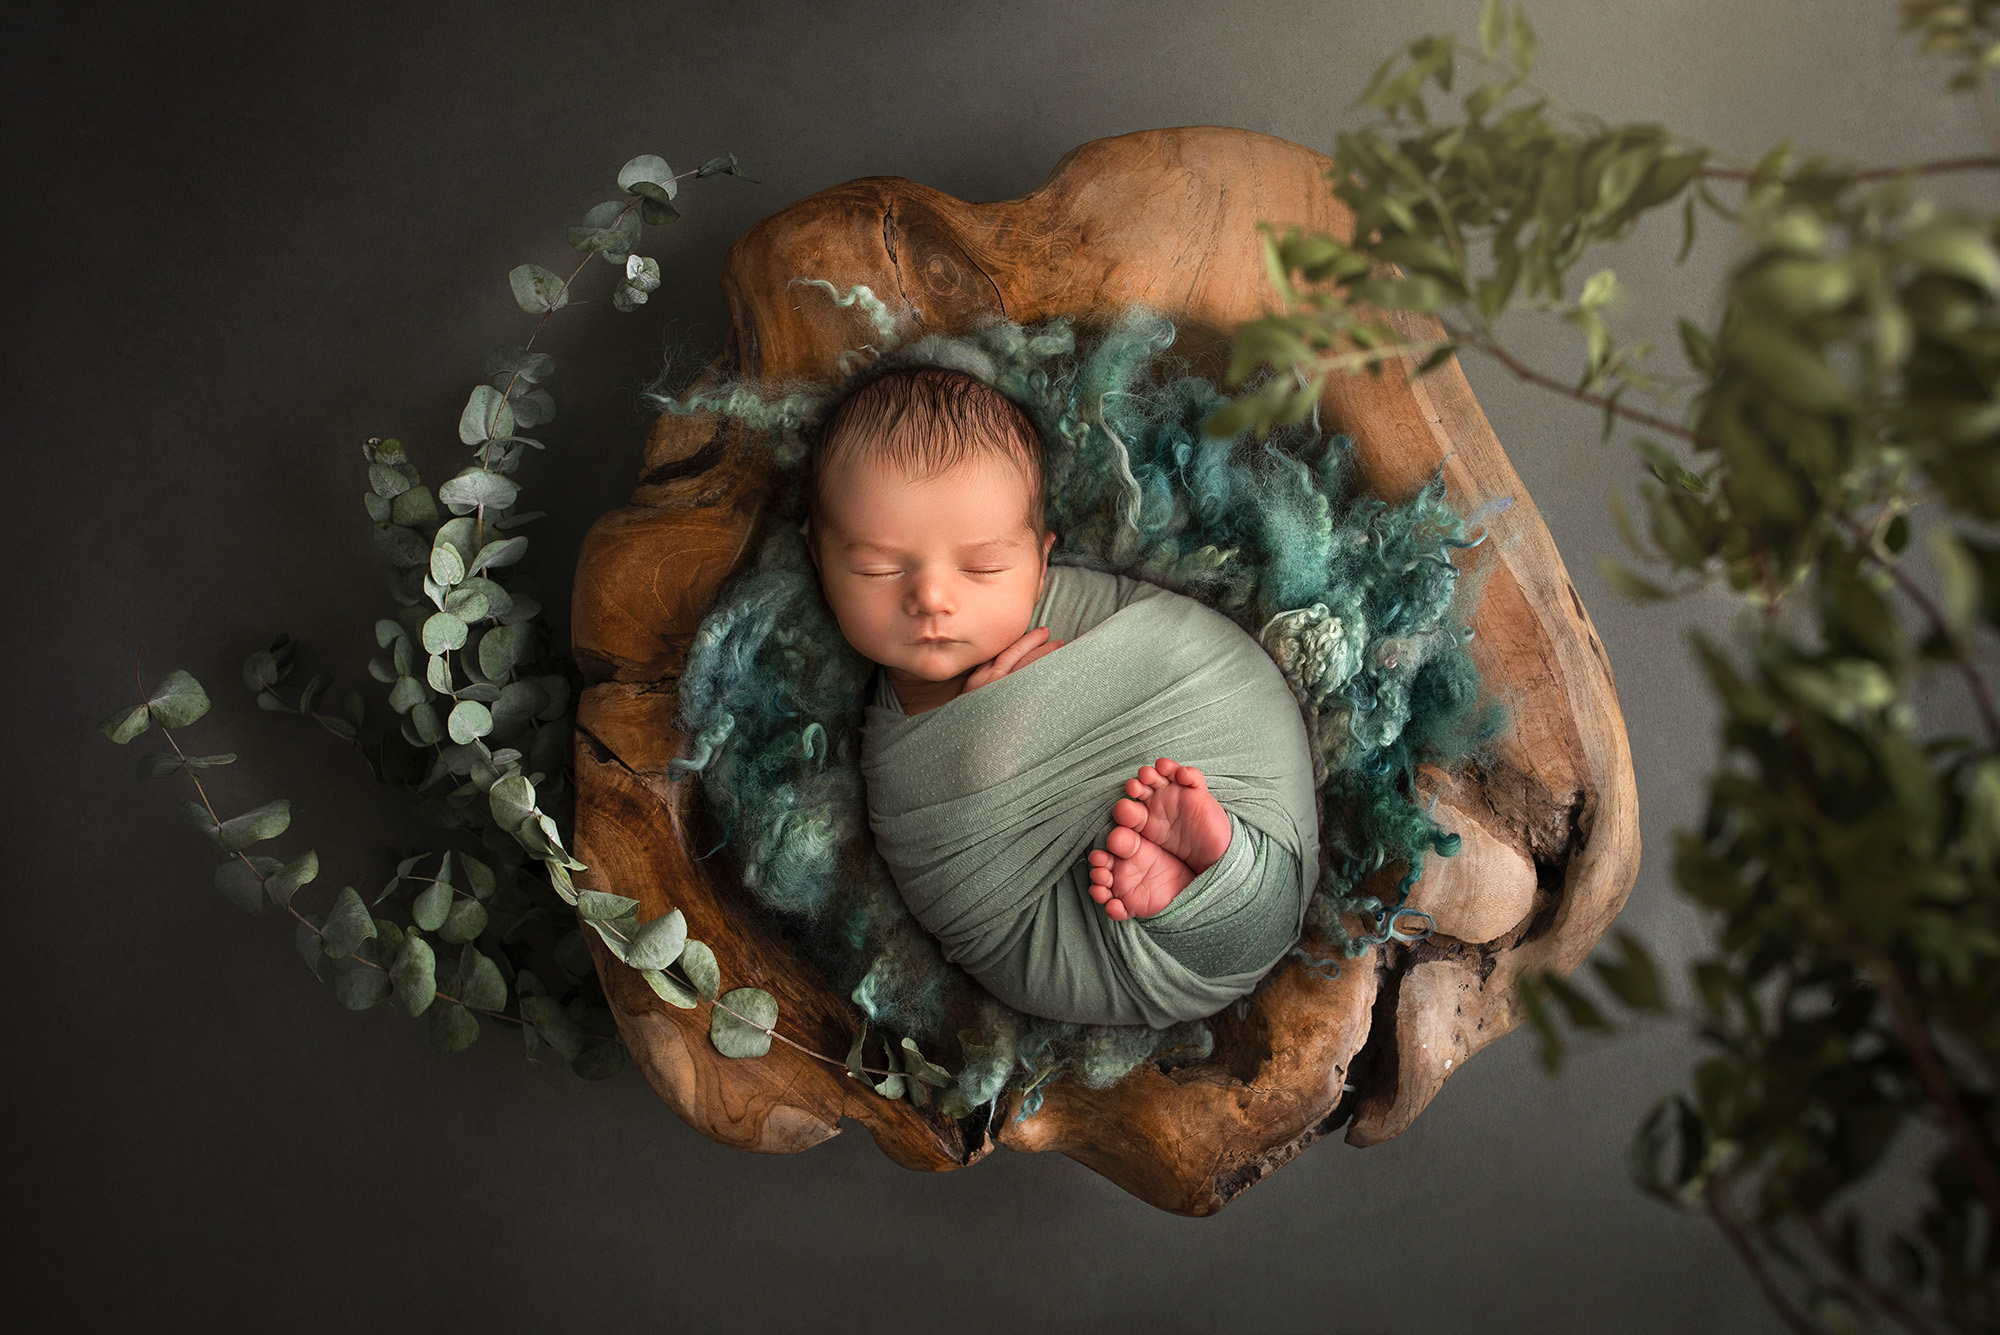 newborn boy sleeping in a rustic bowl with eucalyptus and green fluff